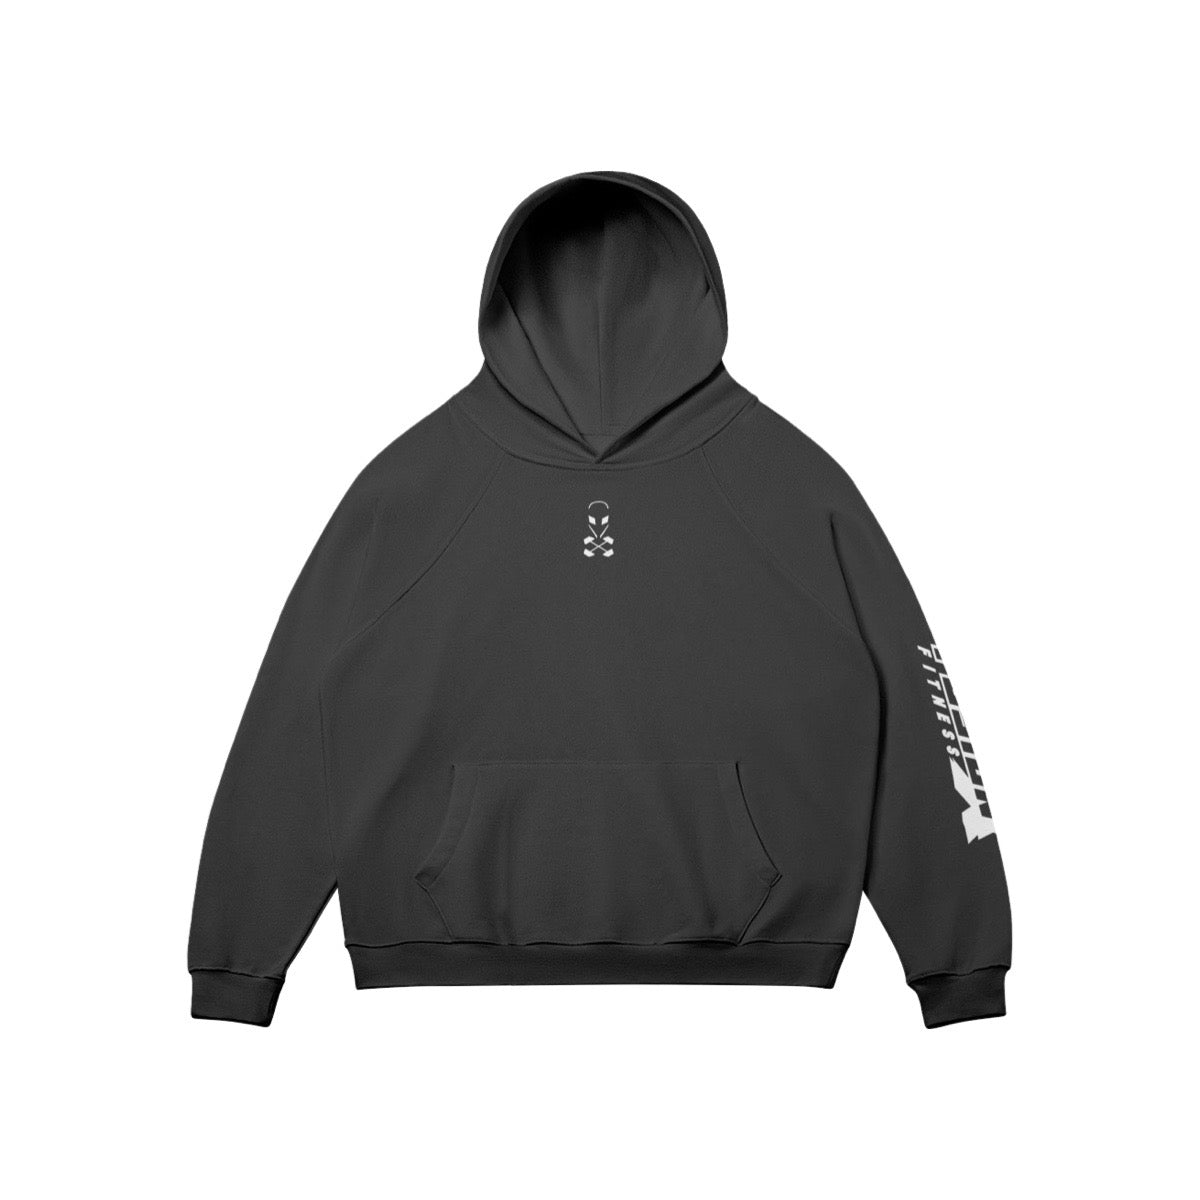 FusionX pullover gym hoodie